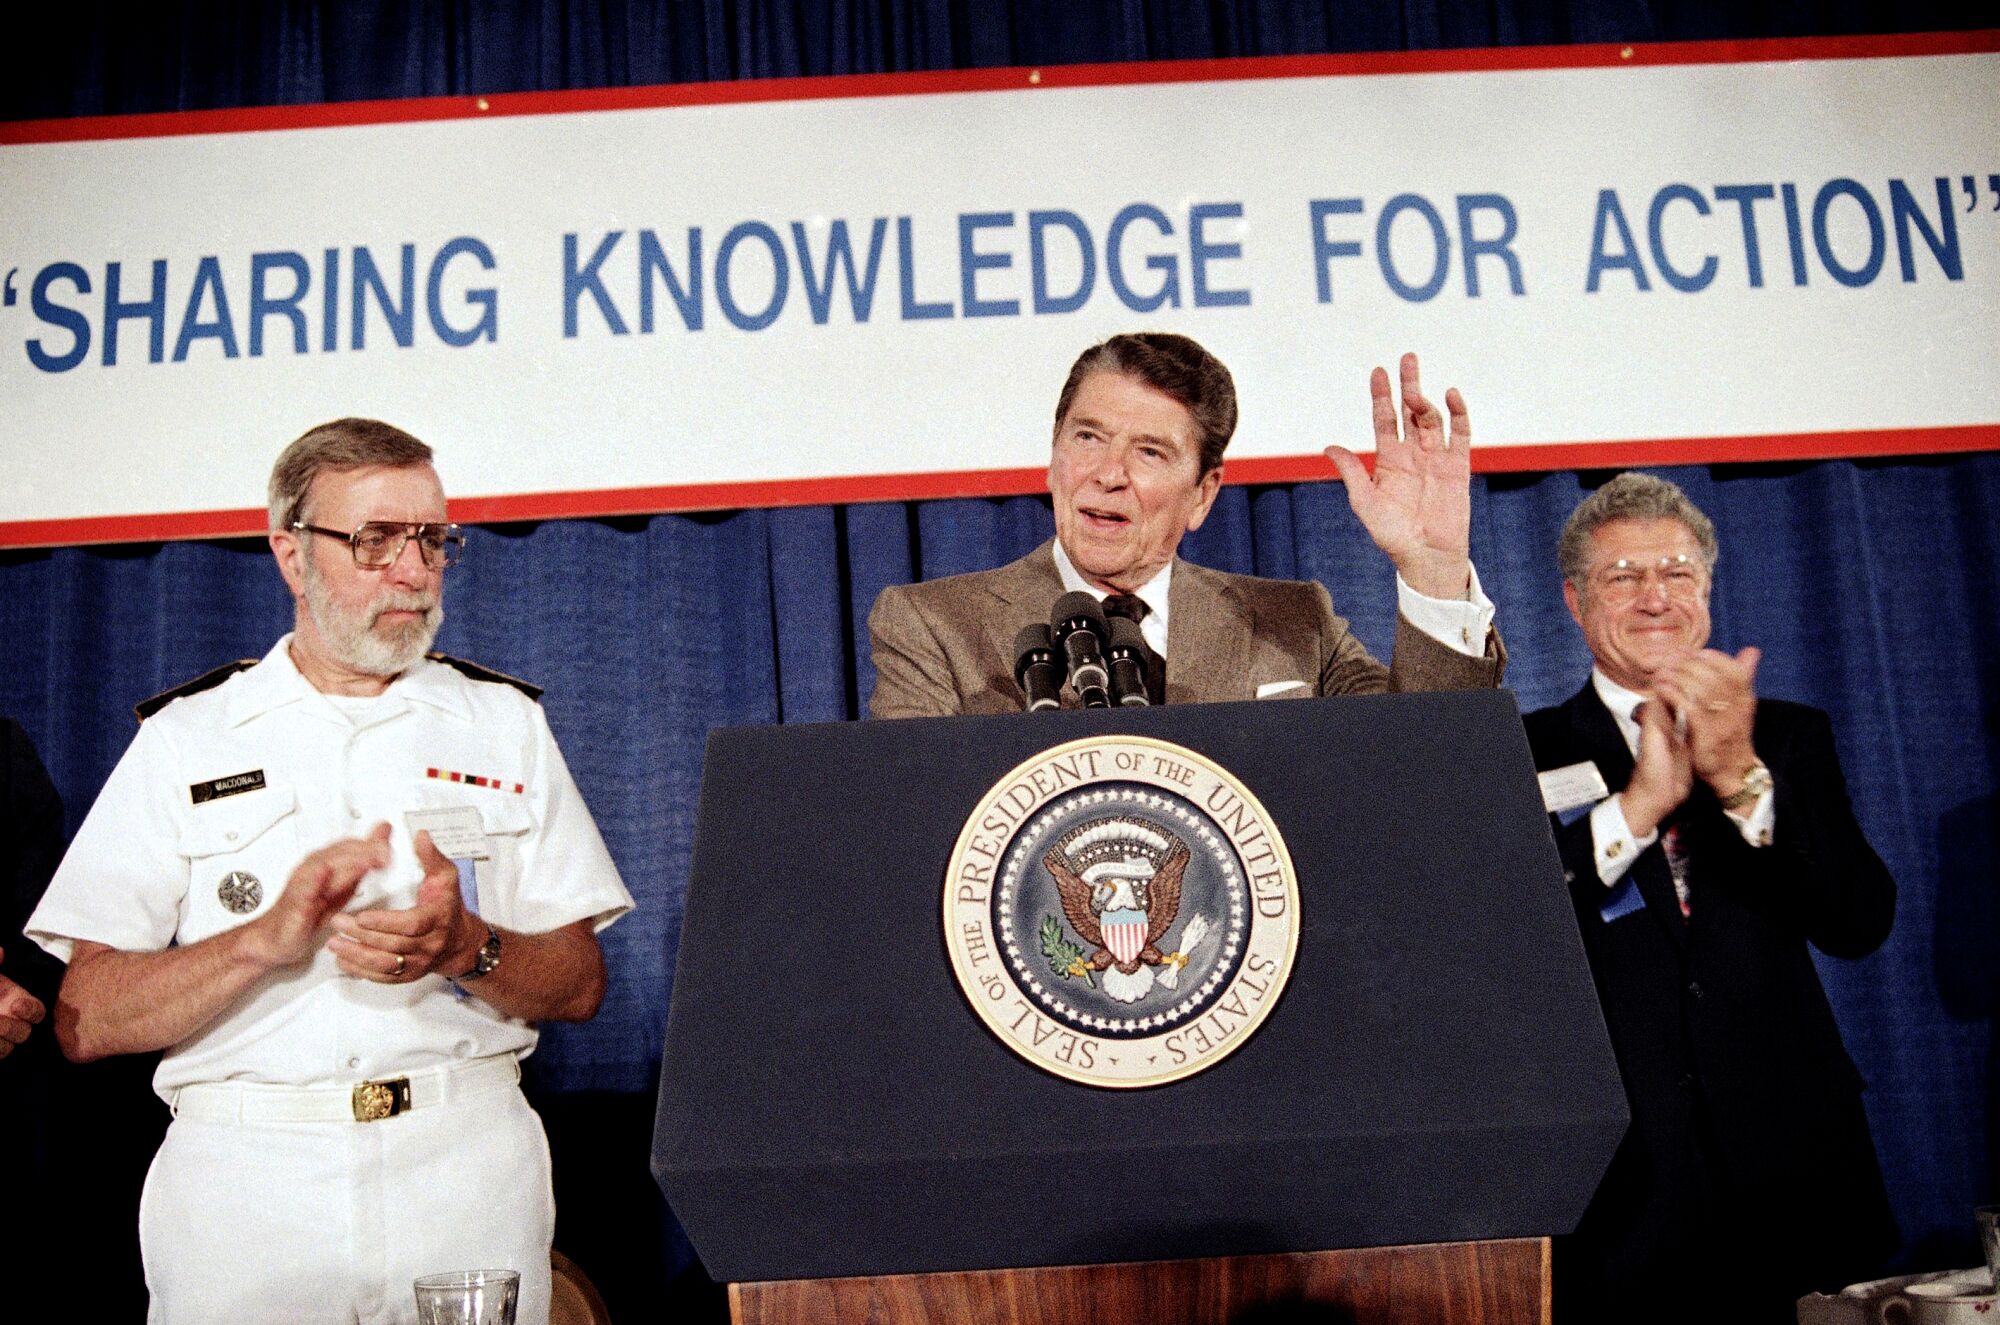 President Reagan speaks at a podium, flanked by two other men